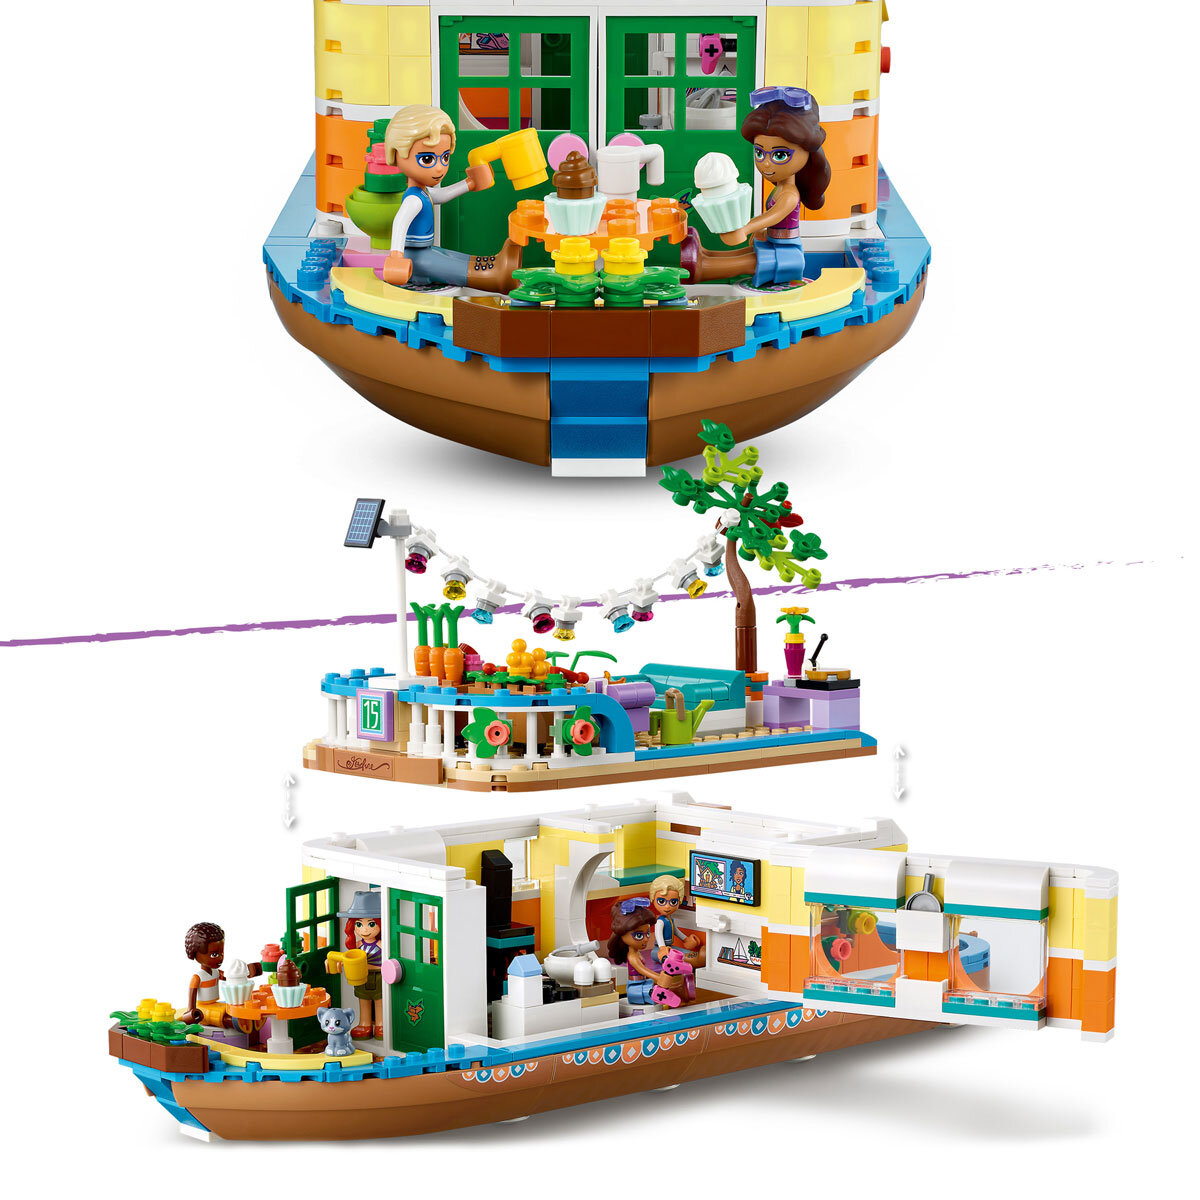 Buy LEGO Friends Canal Houseboat Feature3 Image at Costco.co.uk